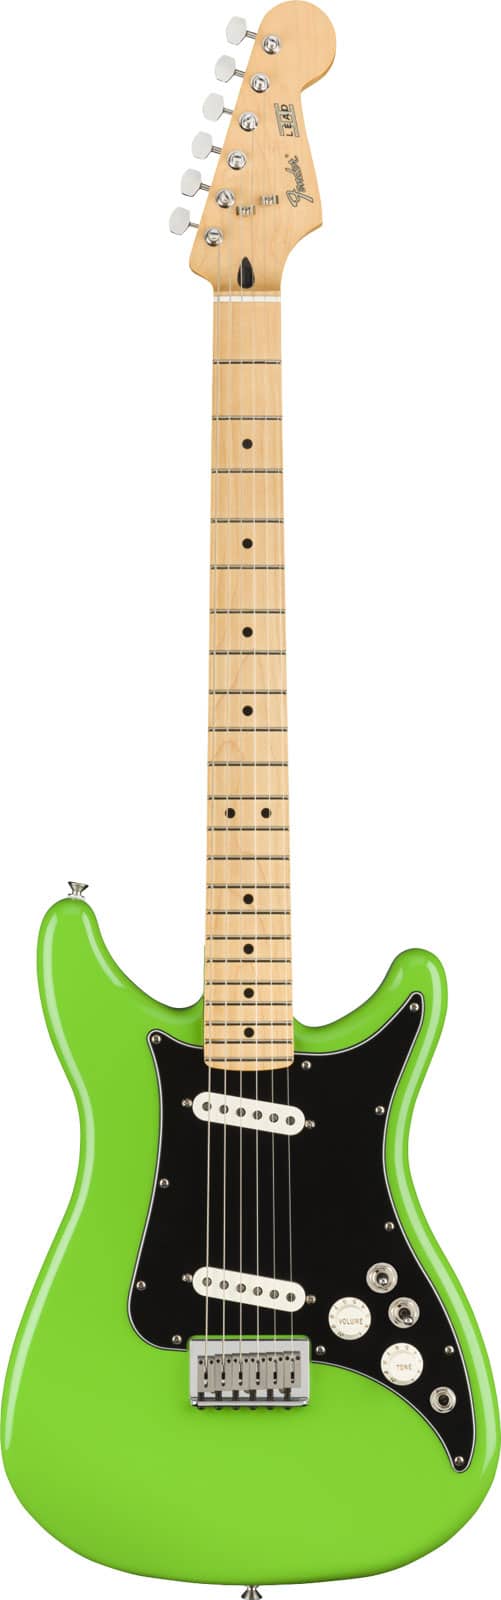 FENDER MEXICAN PLAYER LEAD II MN, NEON GREEN